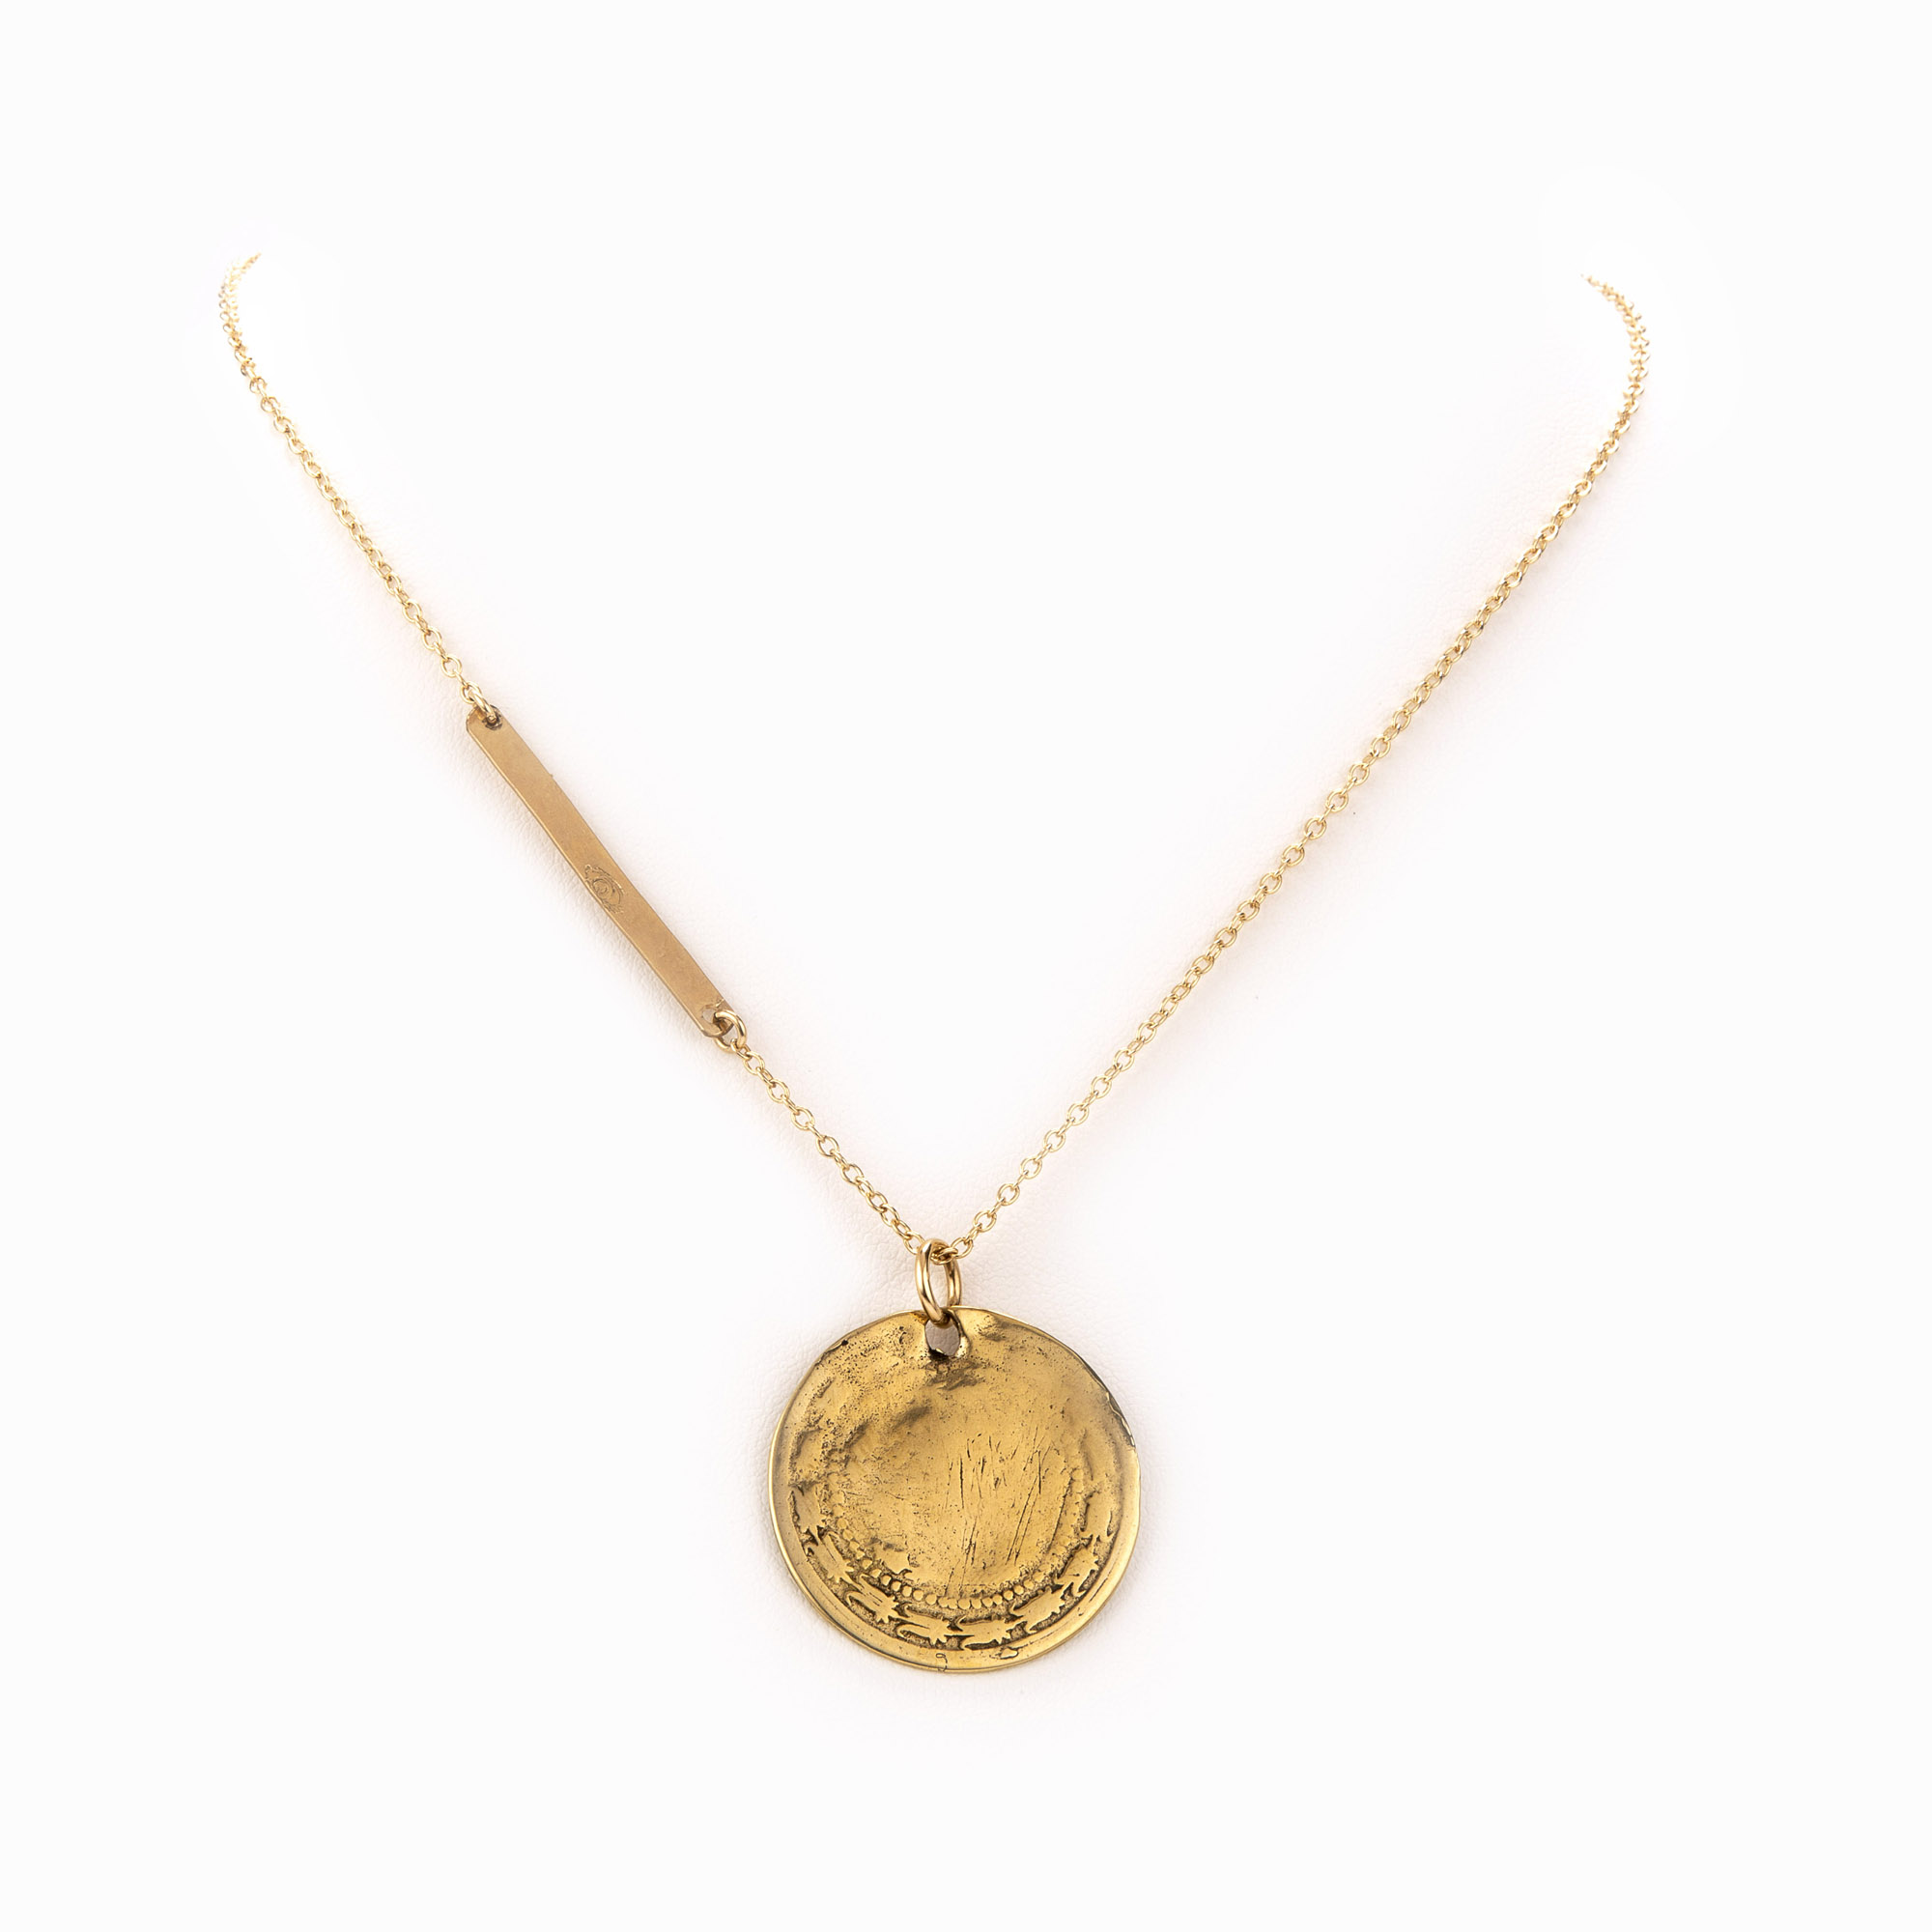 A 14k gold-filled chain necklace mixed with a rich, gold bar and an antique coin.